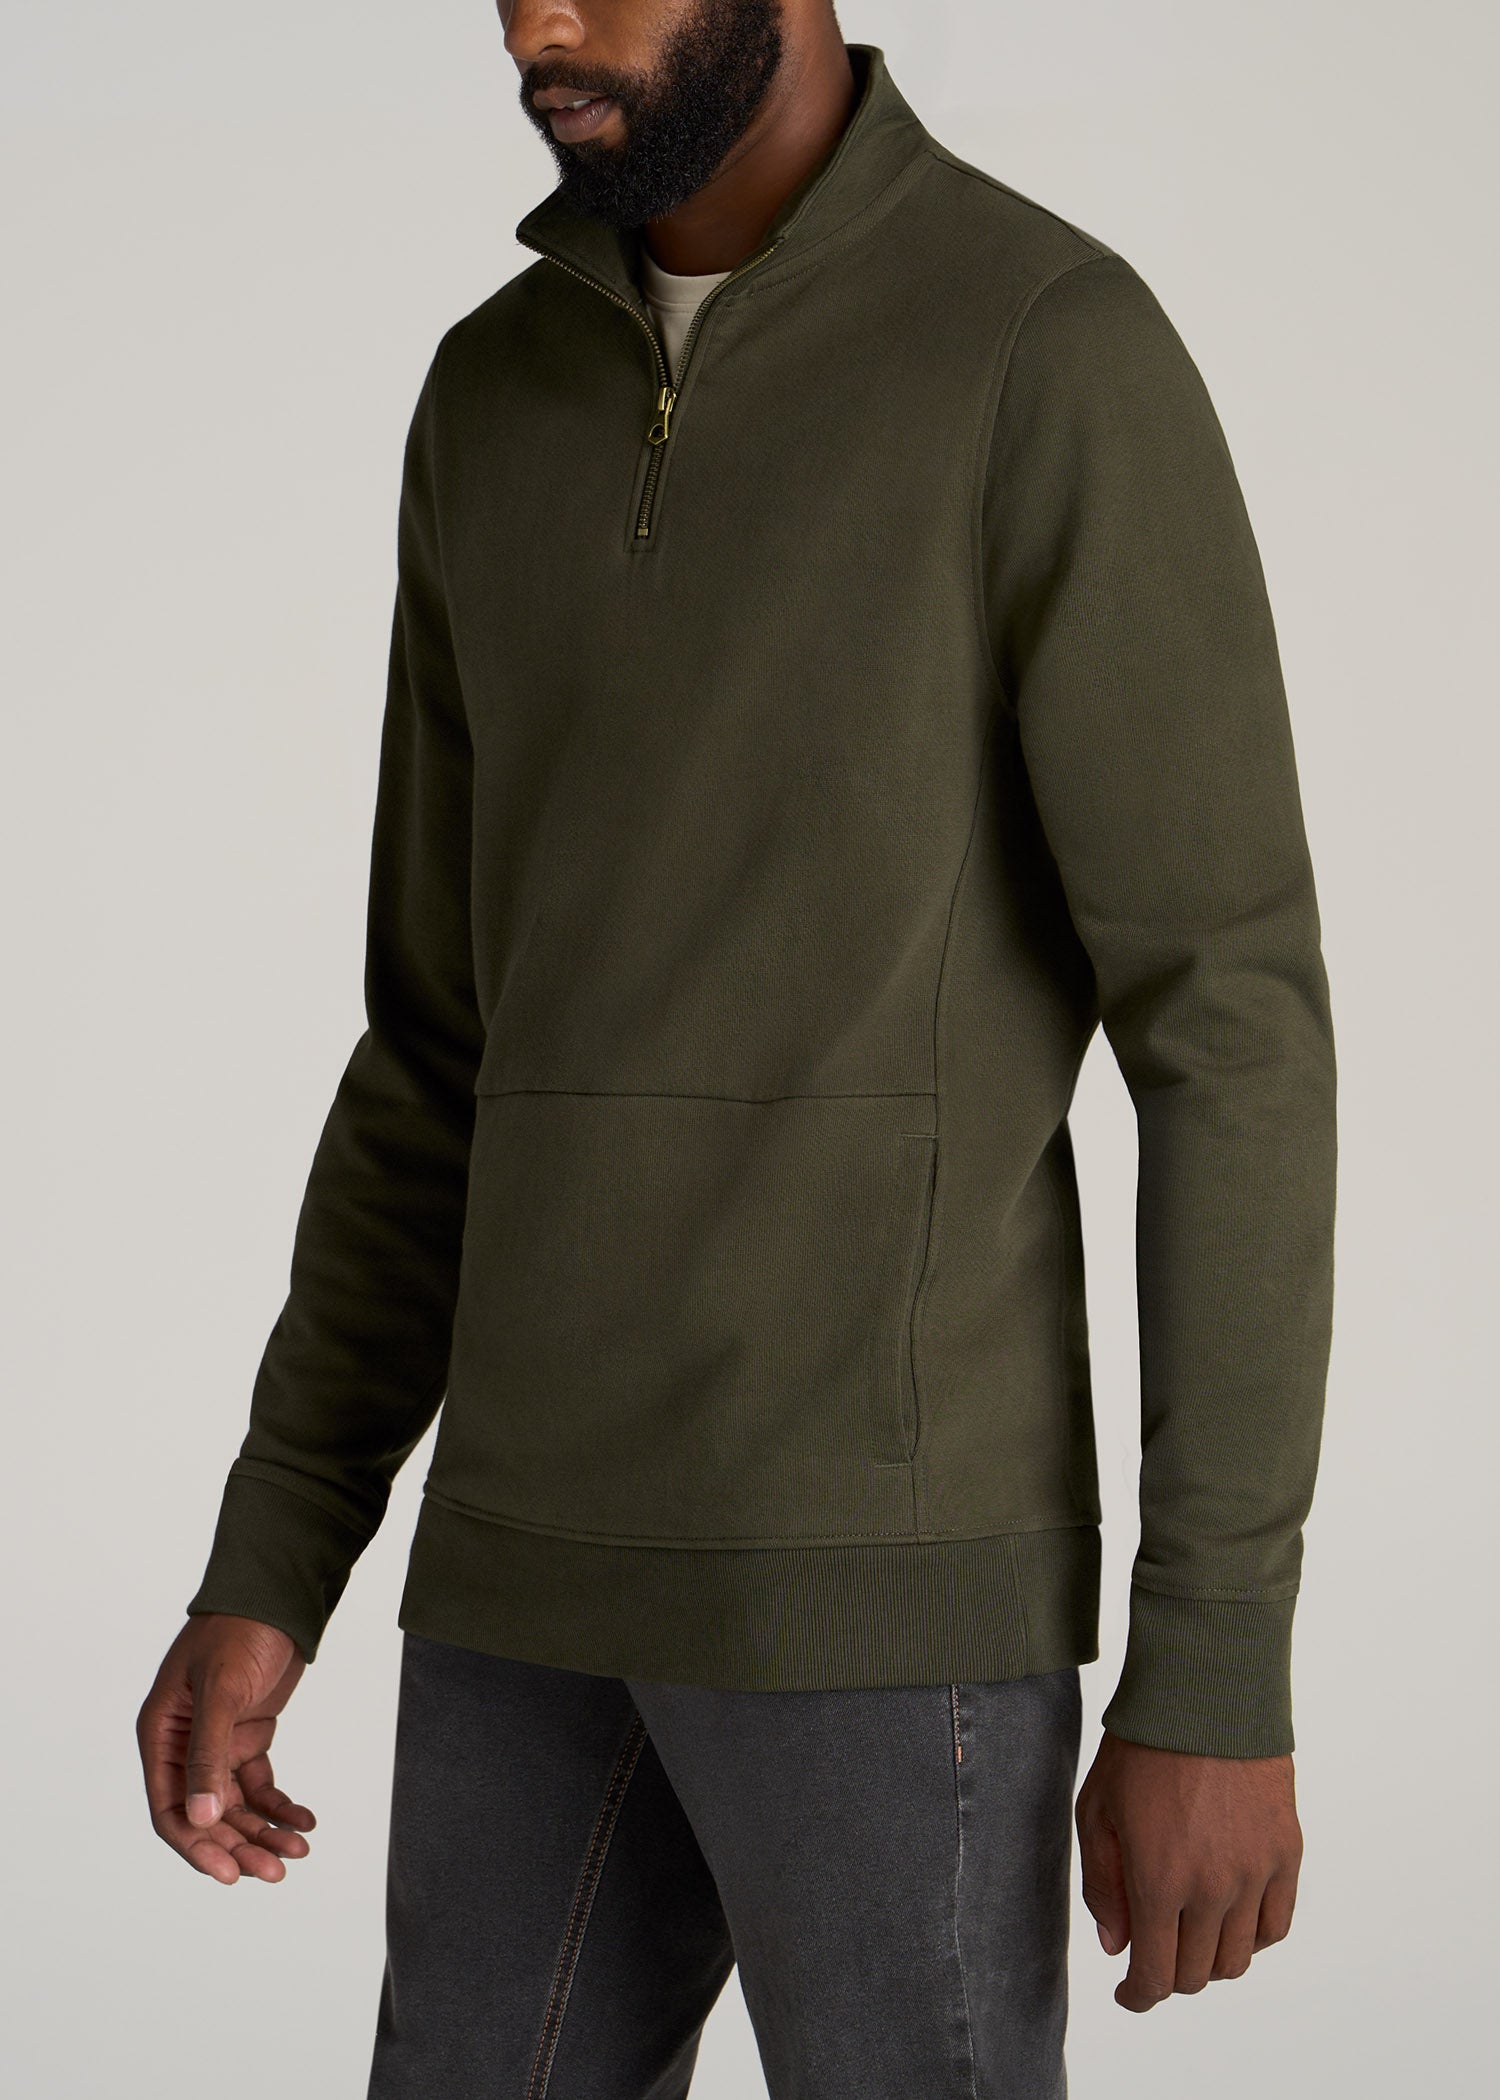       American-Tall-Men-Heavyweight-French-Terry-Quarter-Zip-Pullover-Vintage-Thyme-Green-side